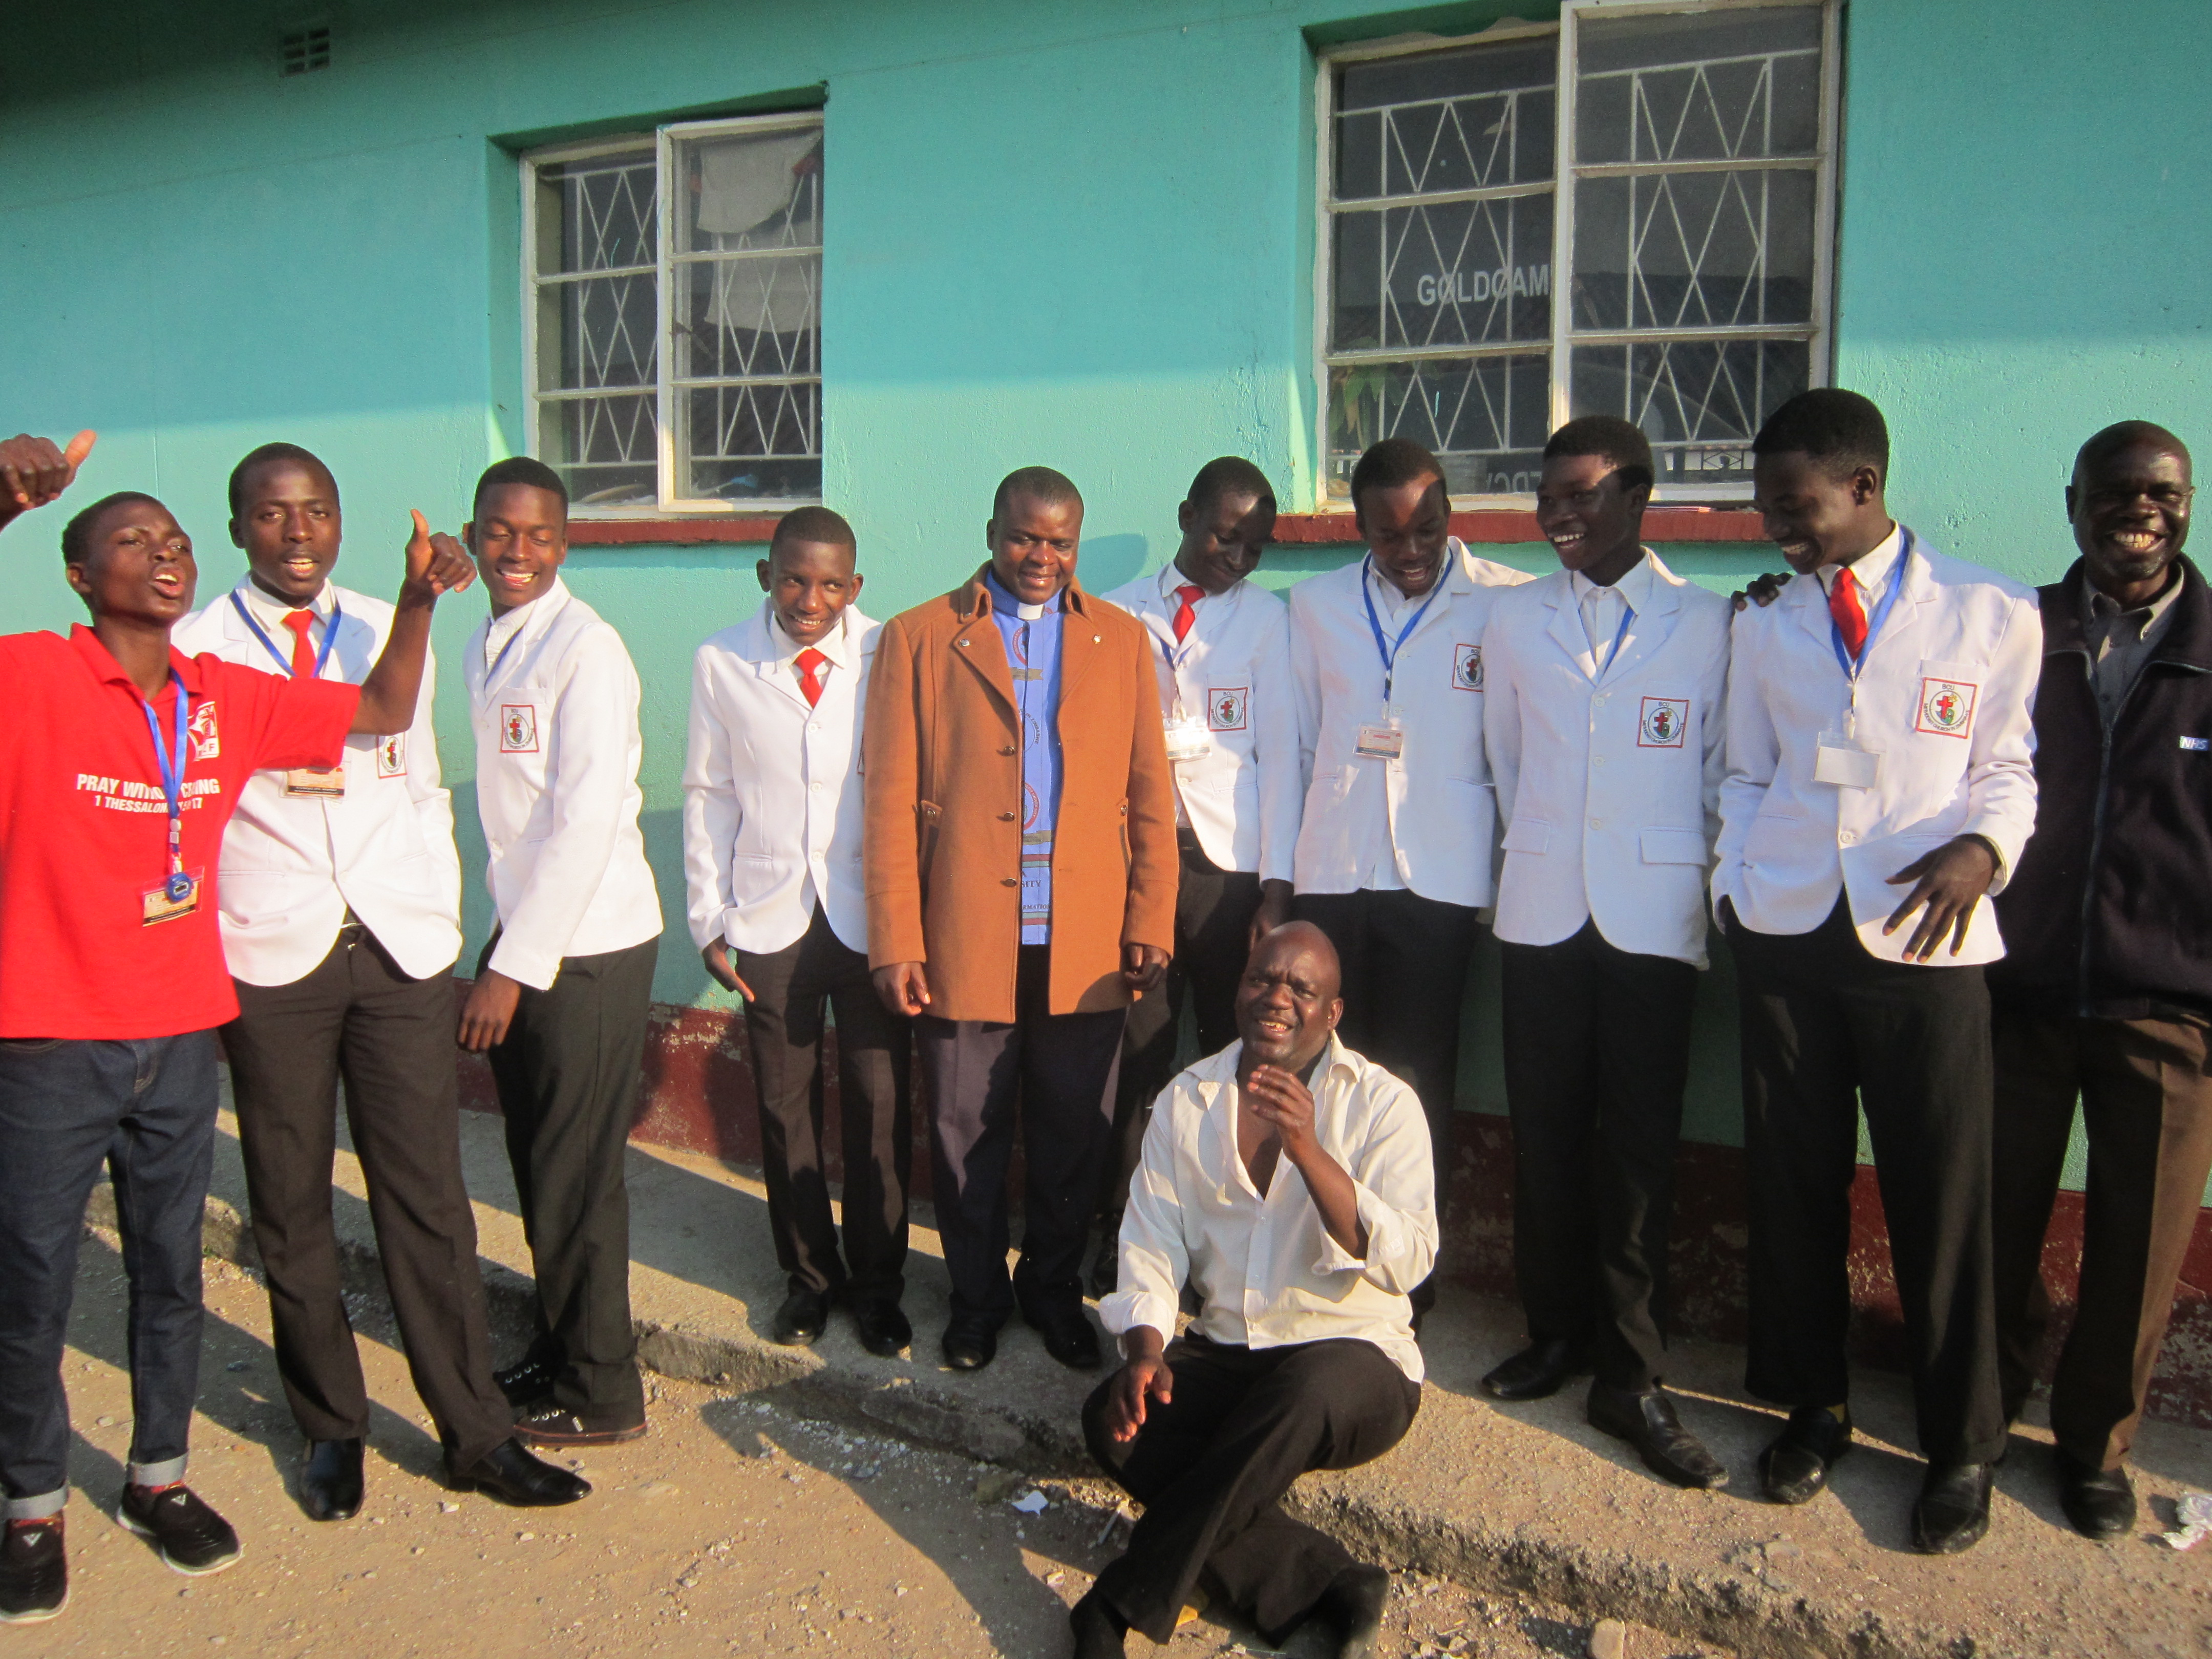 A group of teenage boys attending a Christian Union gathering are proud of their uniforms